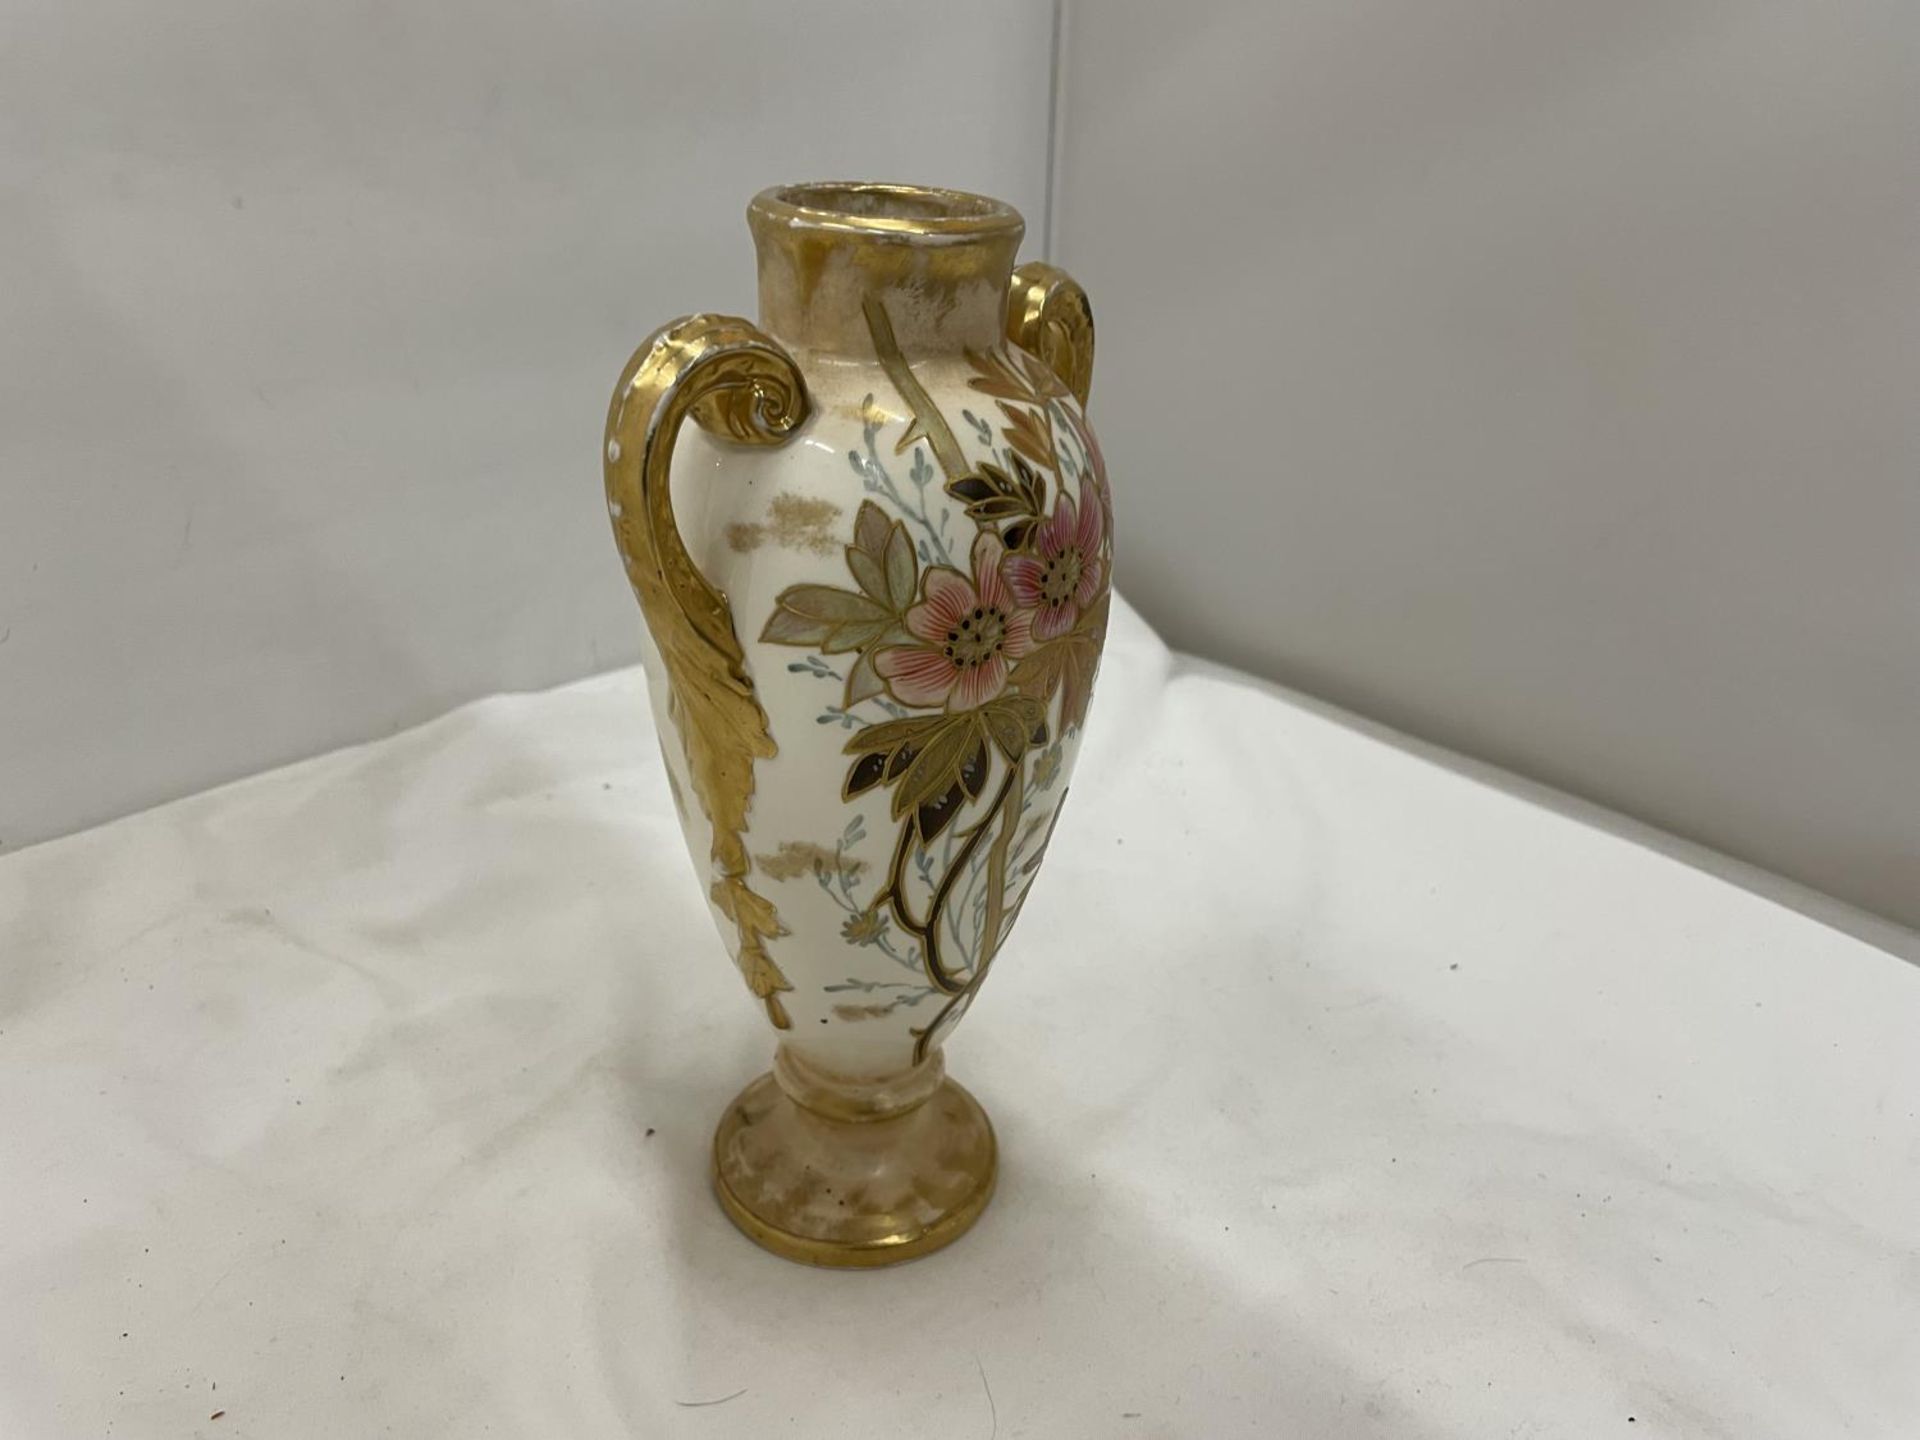 A ROYAL BONN AUSTRIAN VASE BY FRANZ ANTON MEHLEM IN BLUSH IVORY WITH FLORAL AND GILT DECORATION - Image 2 of 6